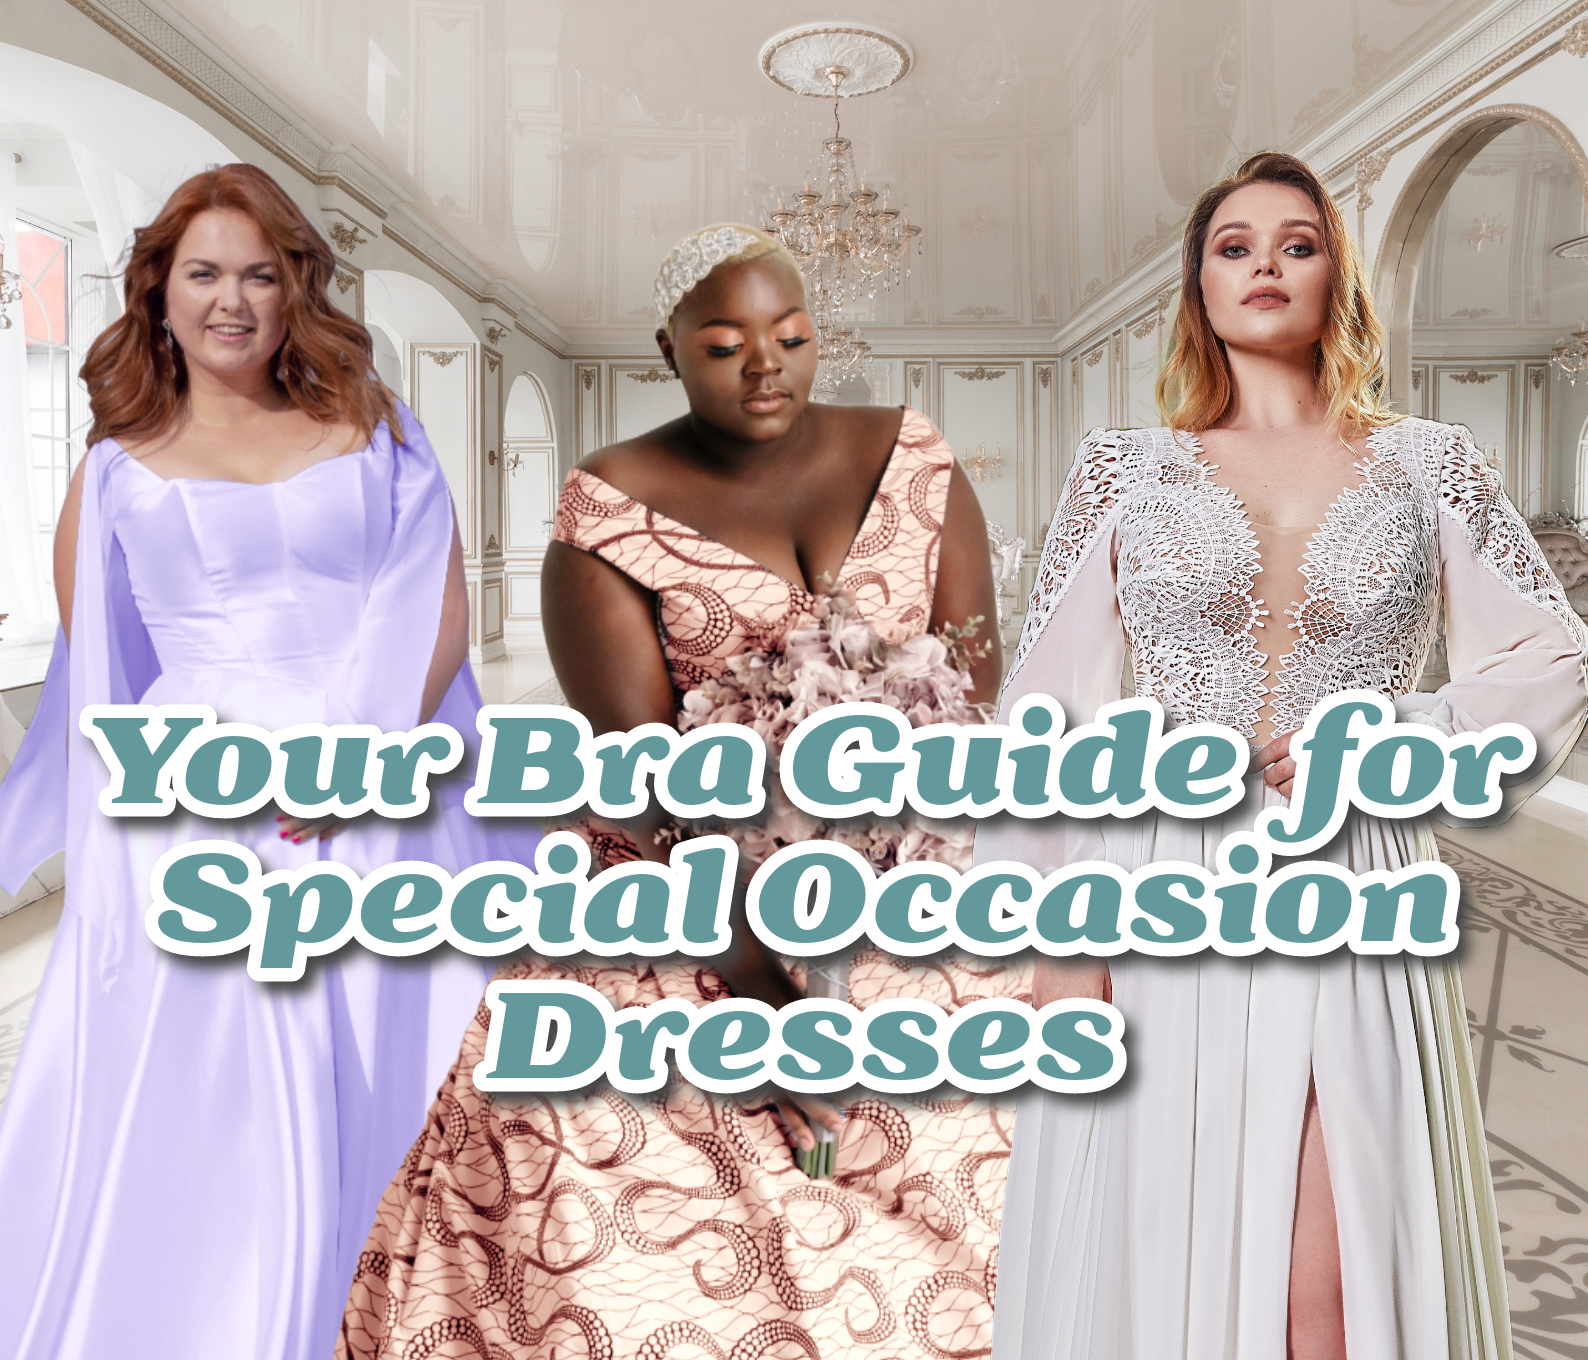 Your Bra Guide to Special Occasion Dresses